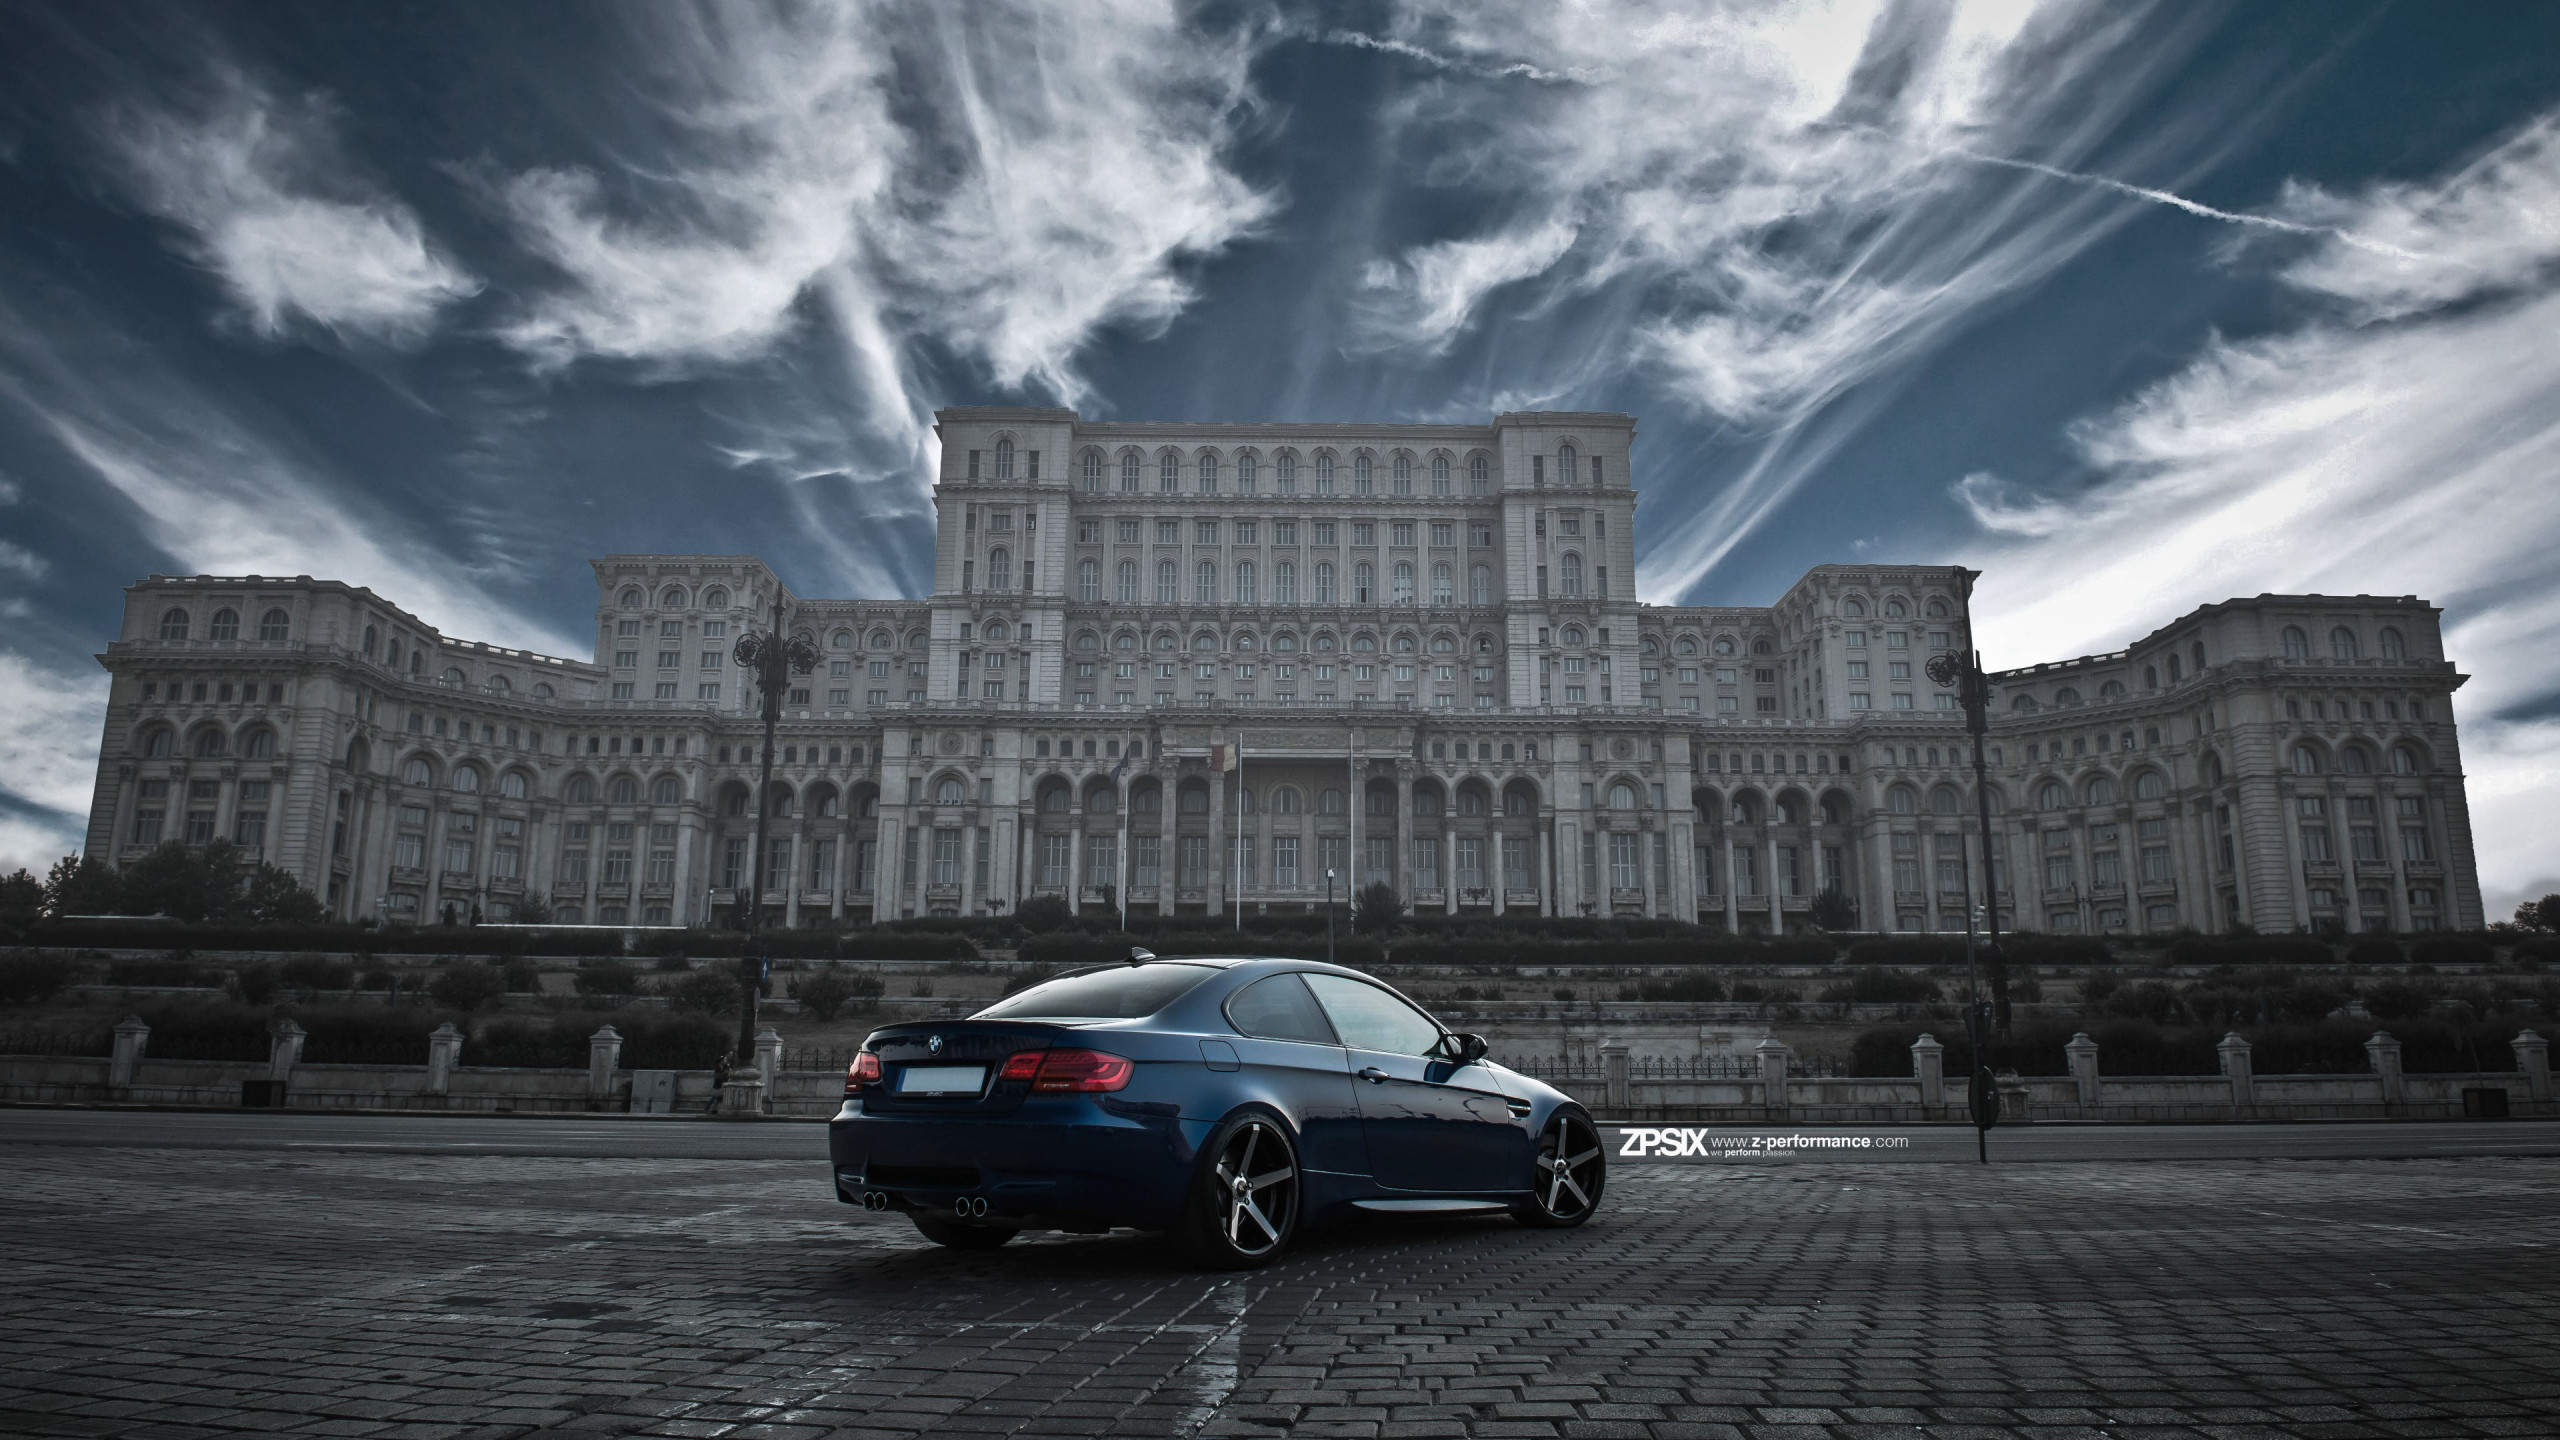 BMW E92 M3 in front of Palace of the Parliament wallpaper 2560x1440